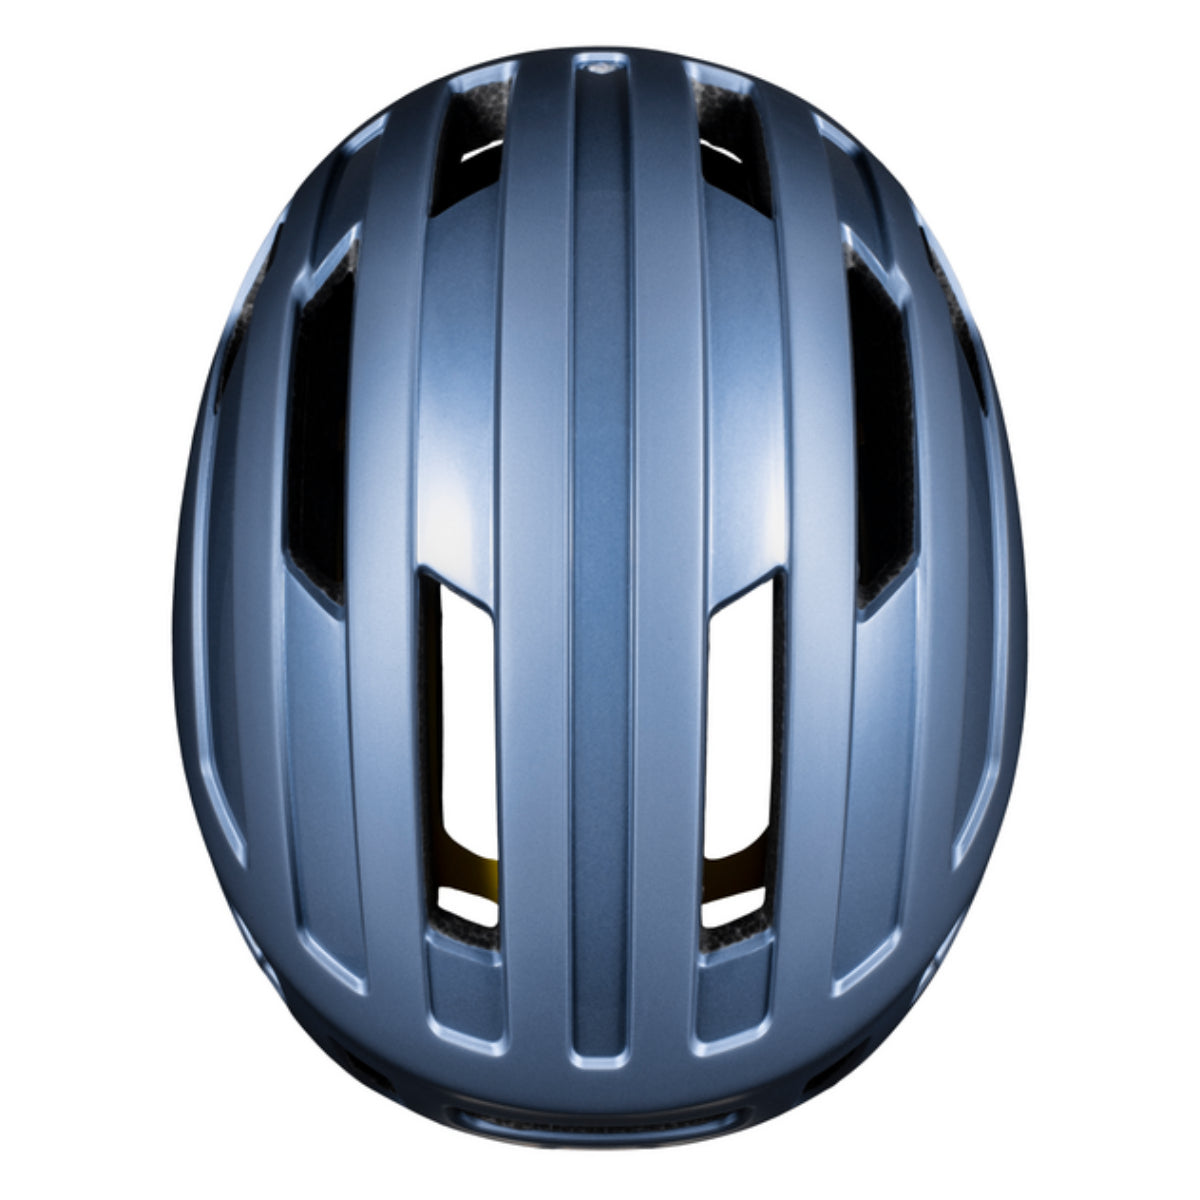 Sweet Protection - Outrider Mips Helmet - Flare Metallic